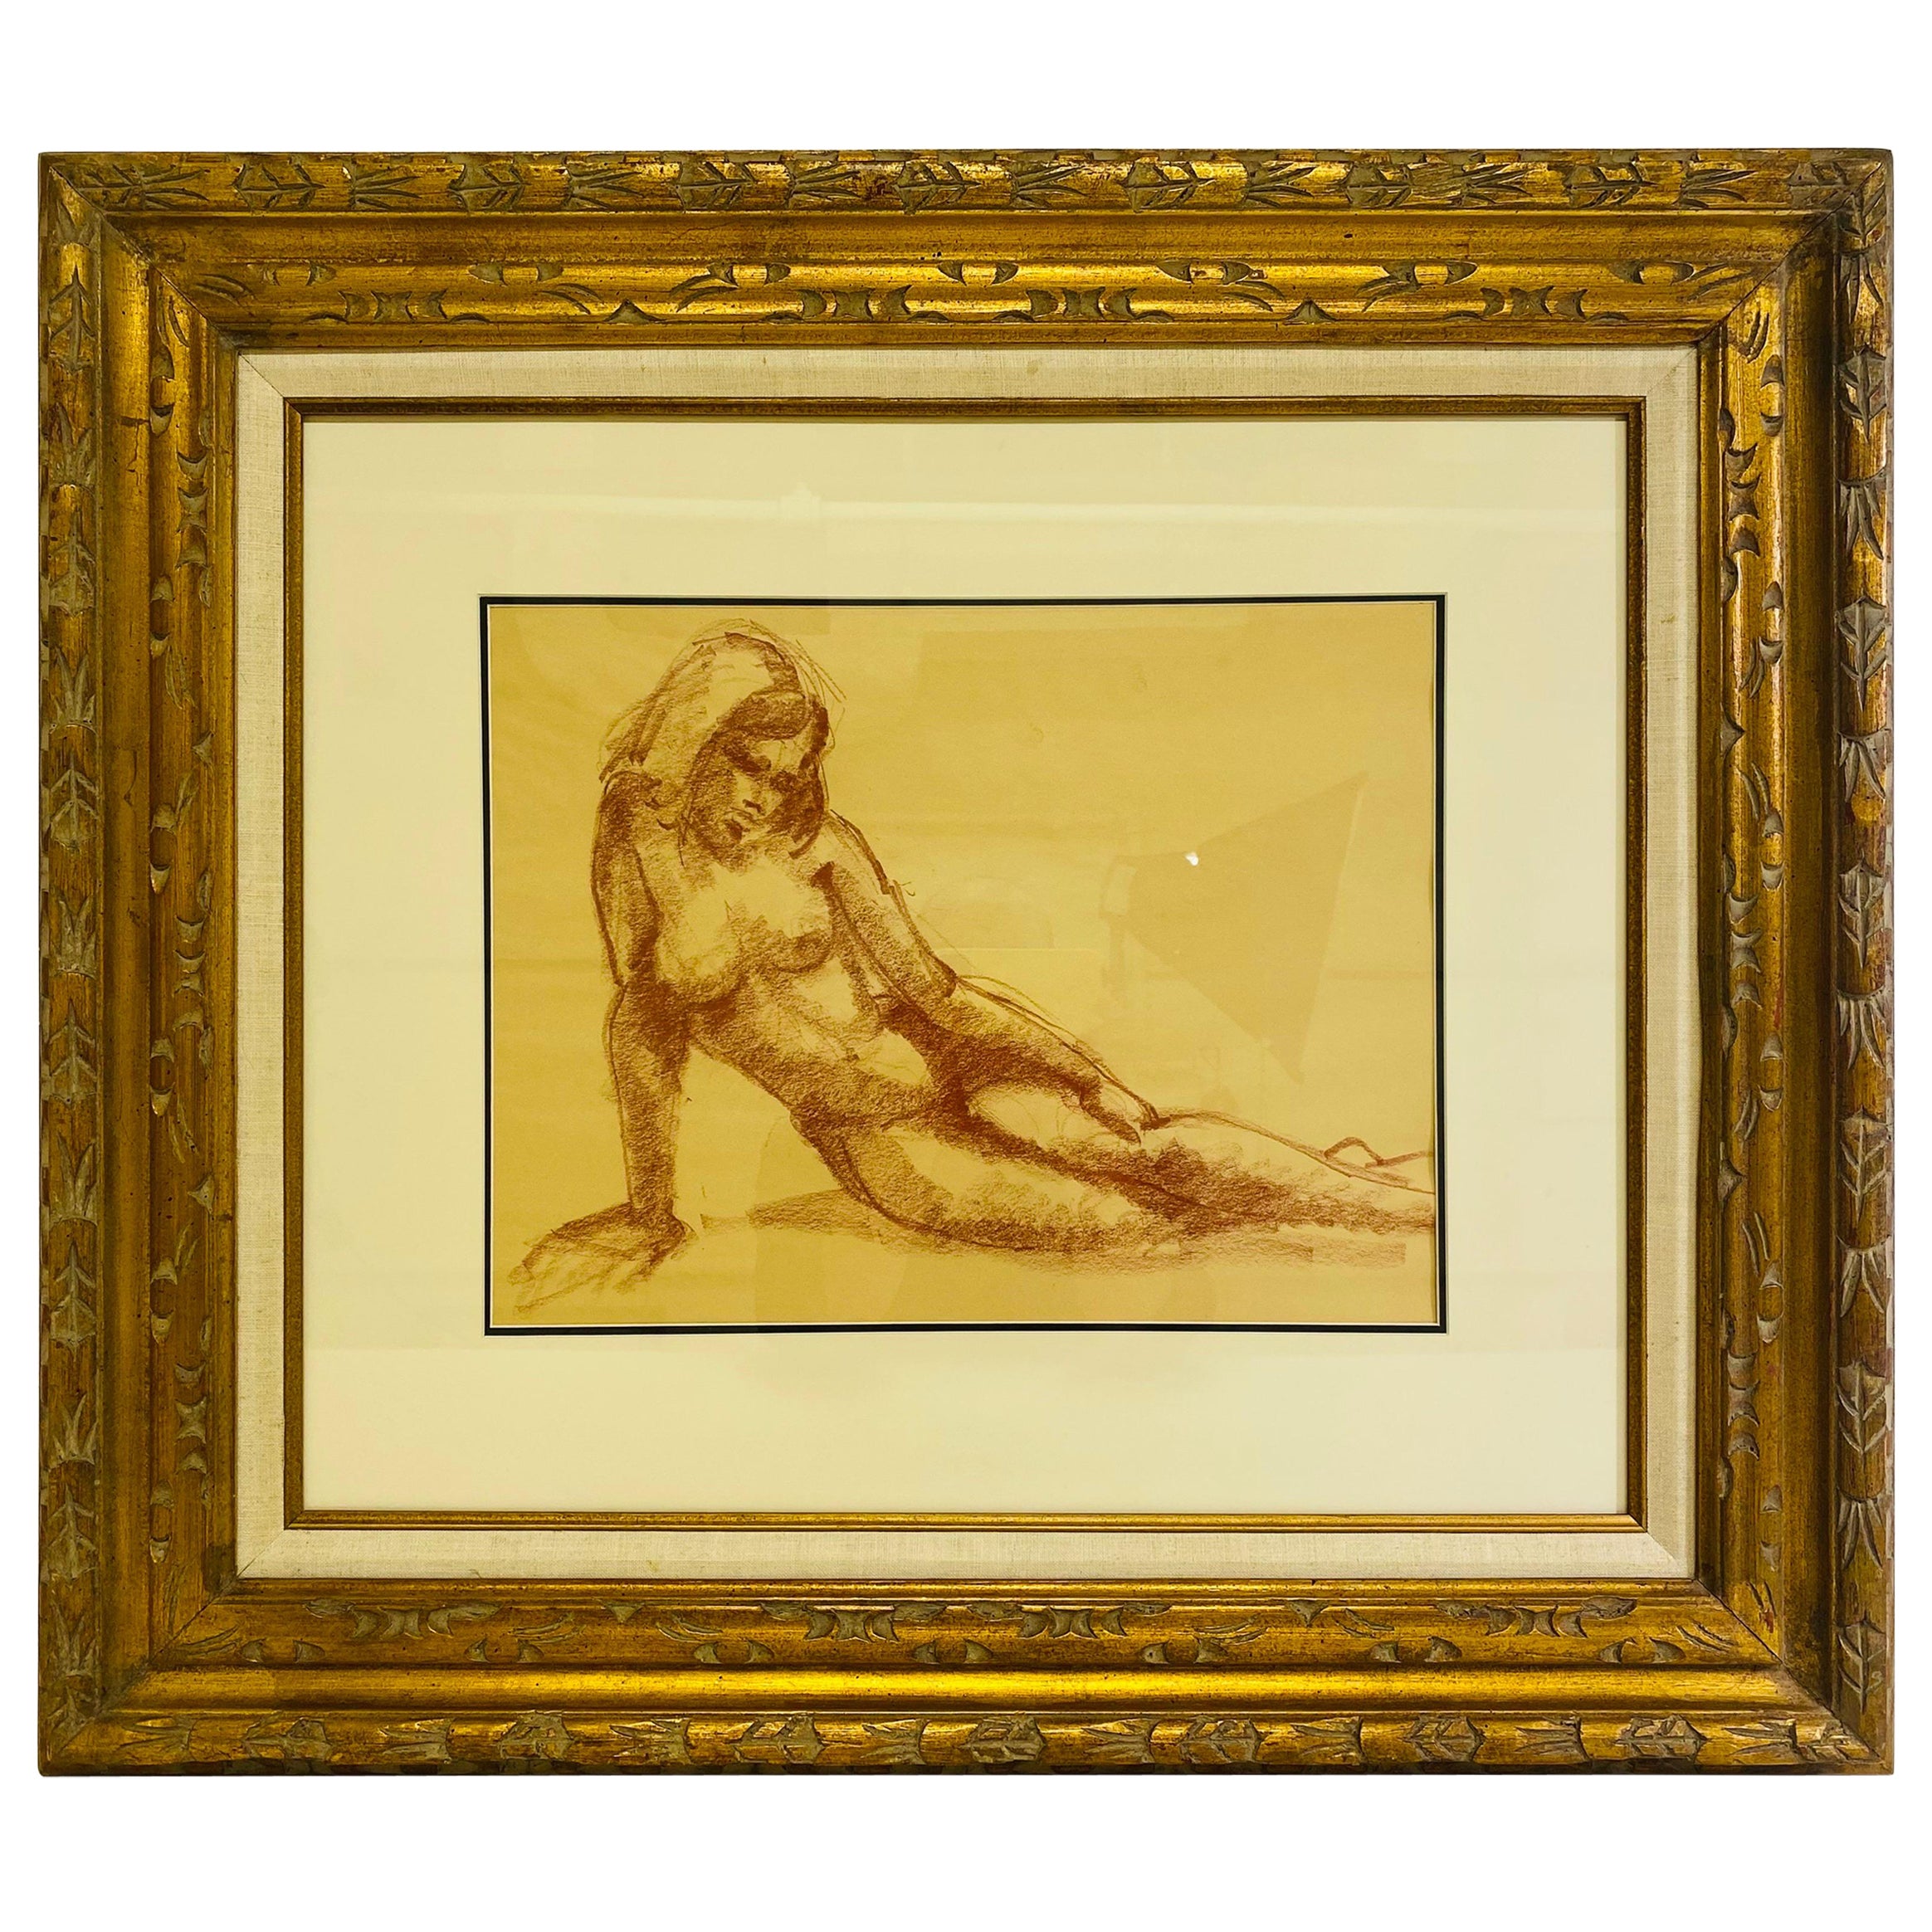 Mid century vintage charcoal on paper female nude study.